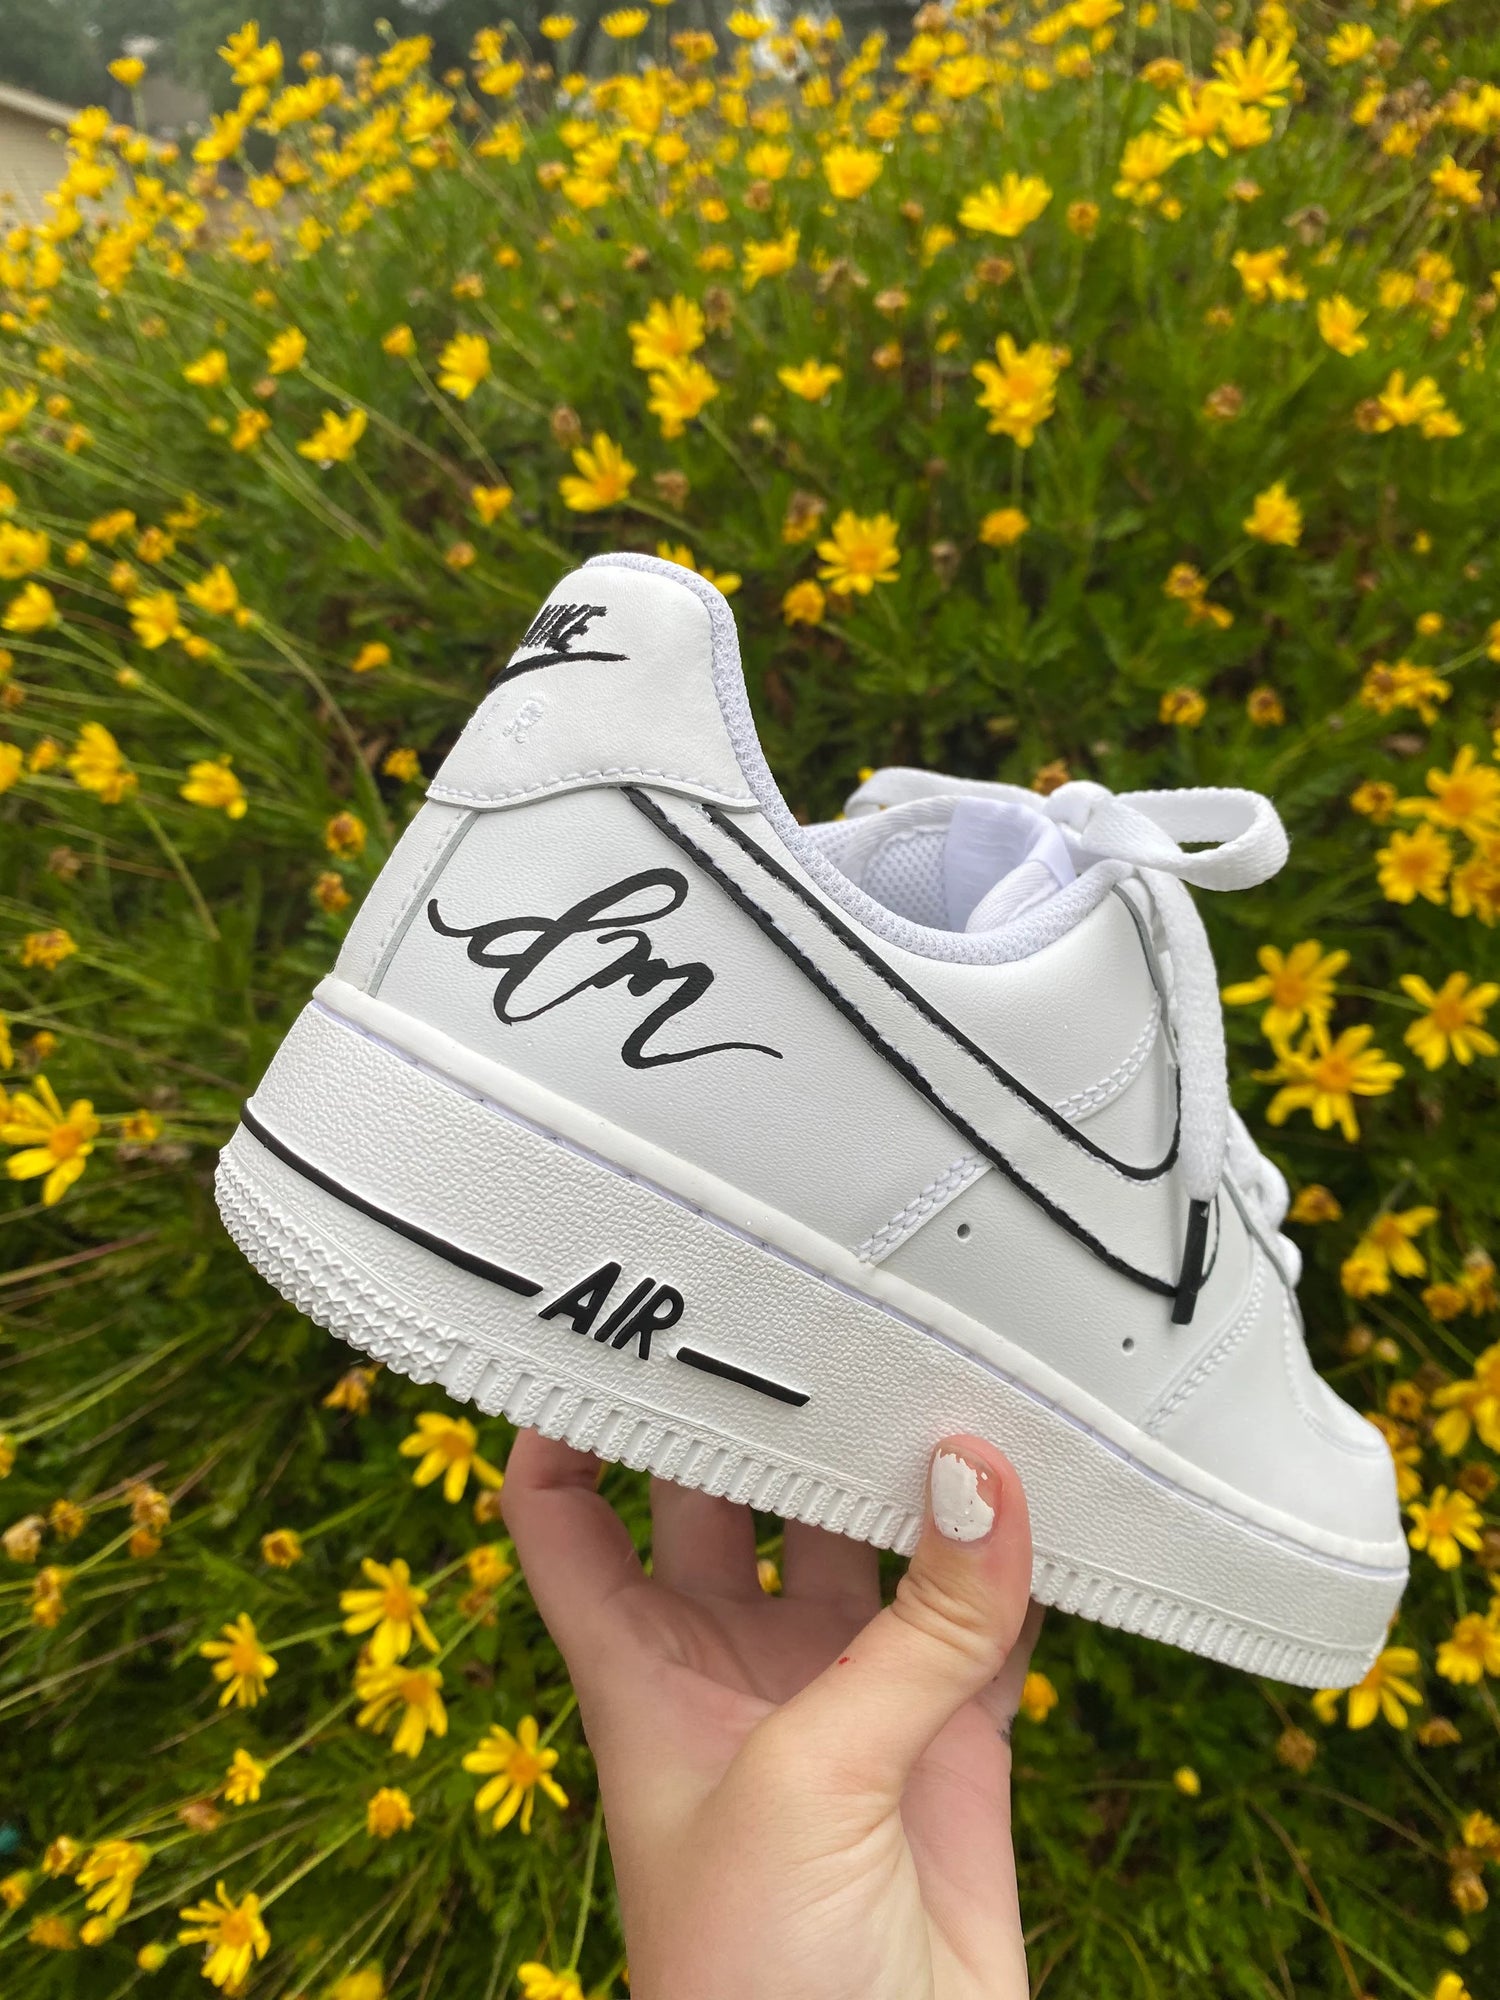 Custom hand painted nike air force 1 white sneakers with a minimalist black design of initials